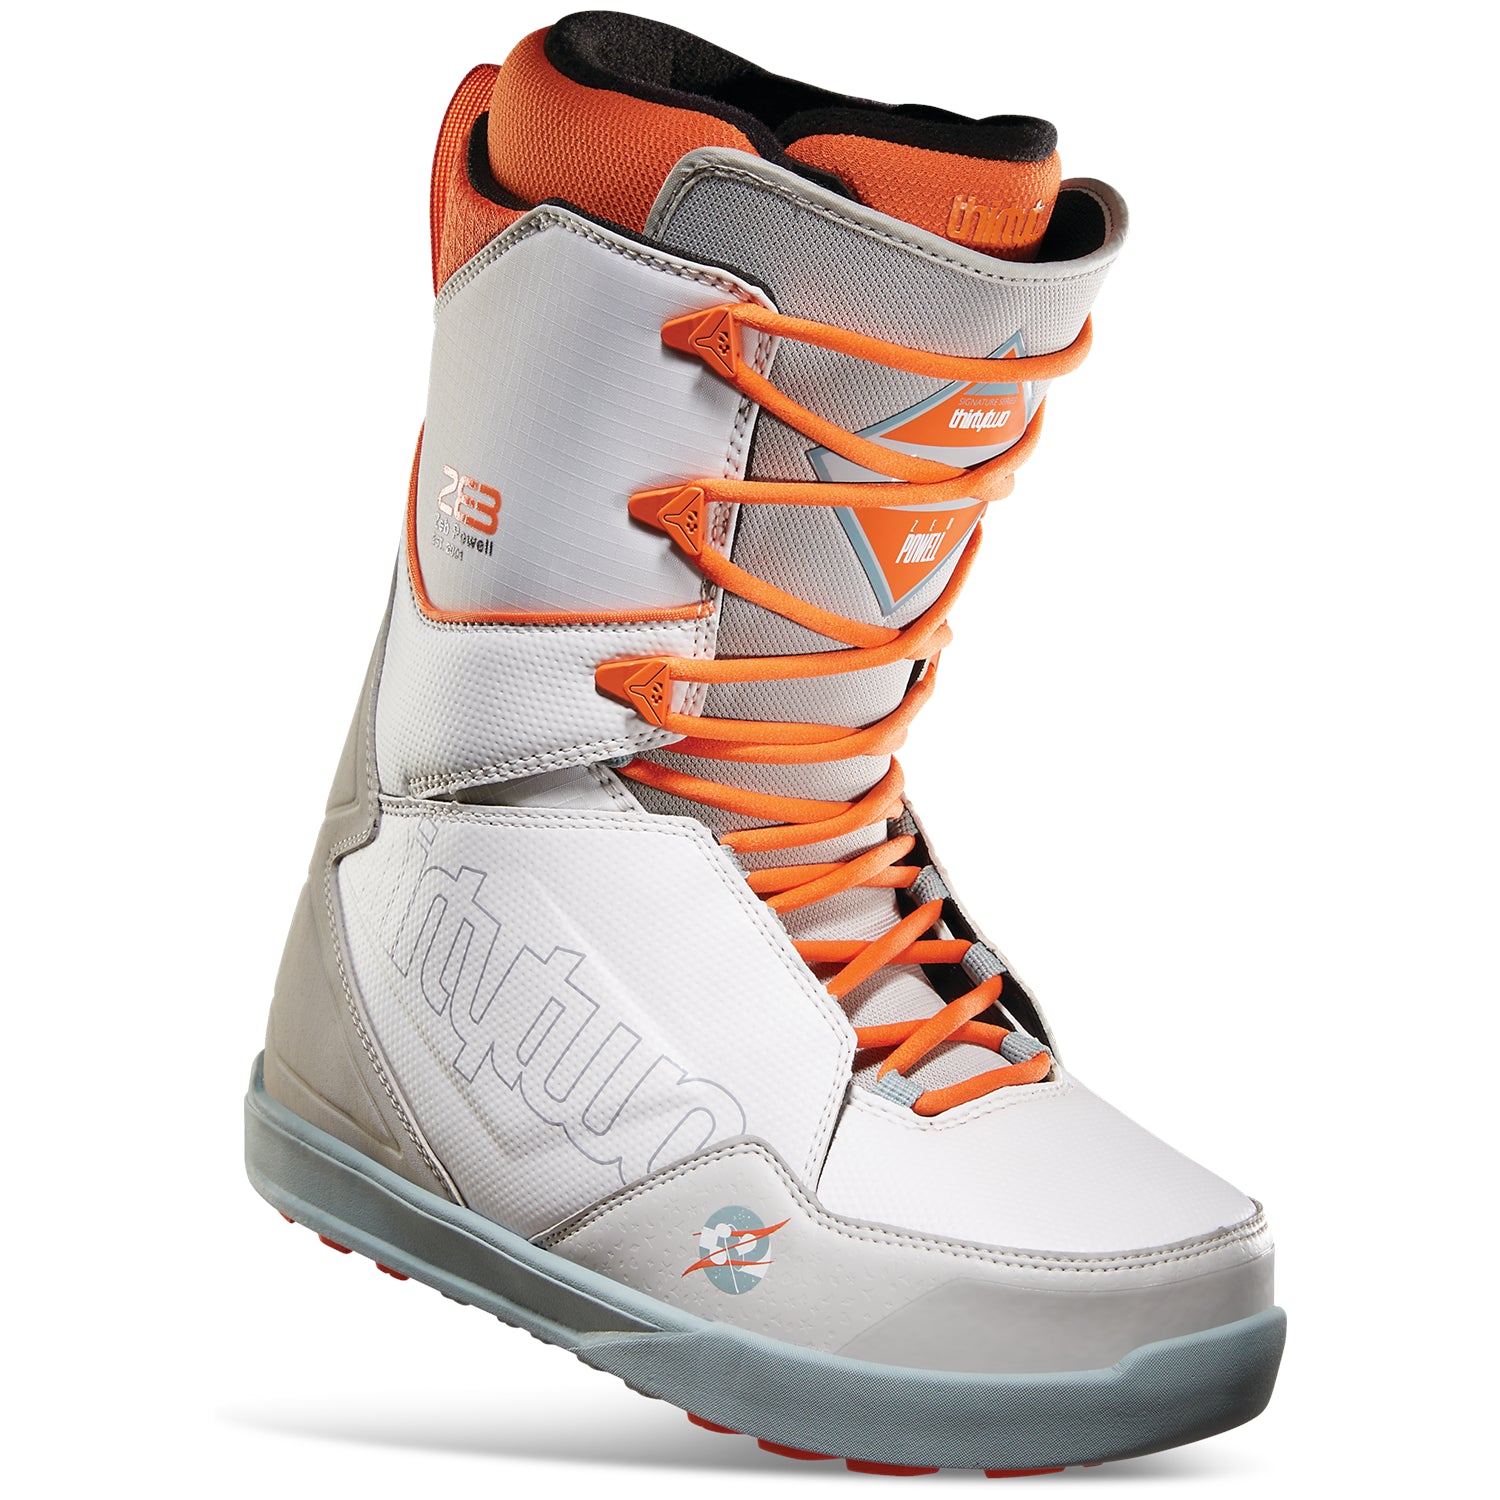 2023 Powell Lashed ThirtyTwo Grey/White Snowboard Boots